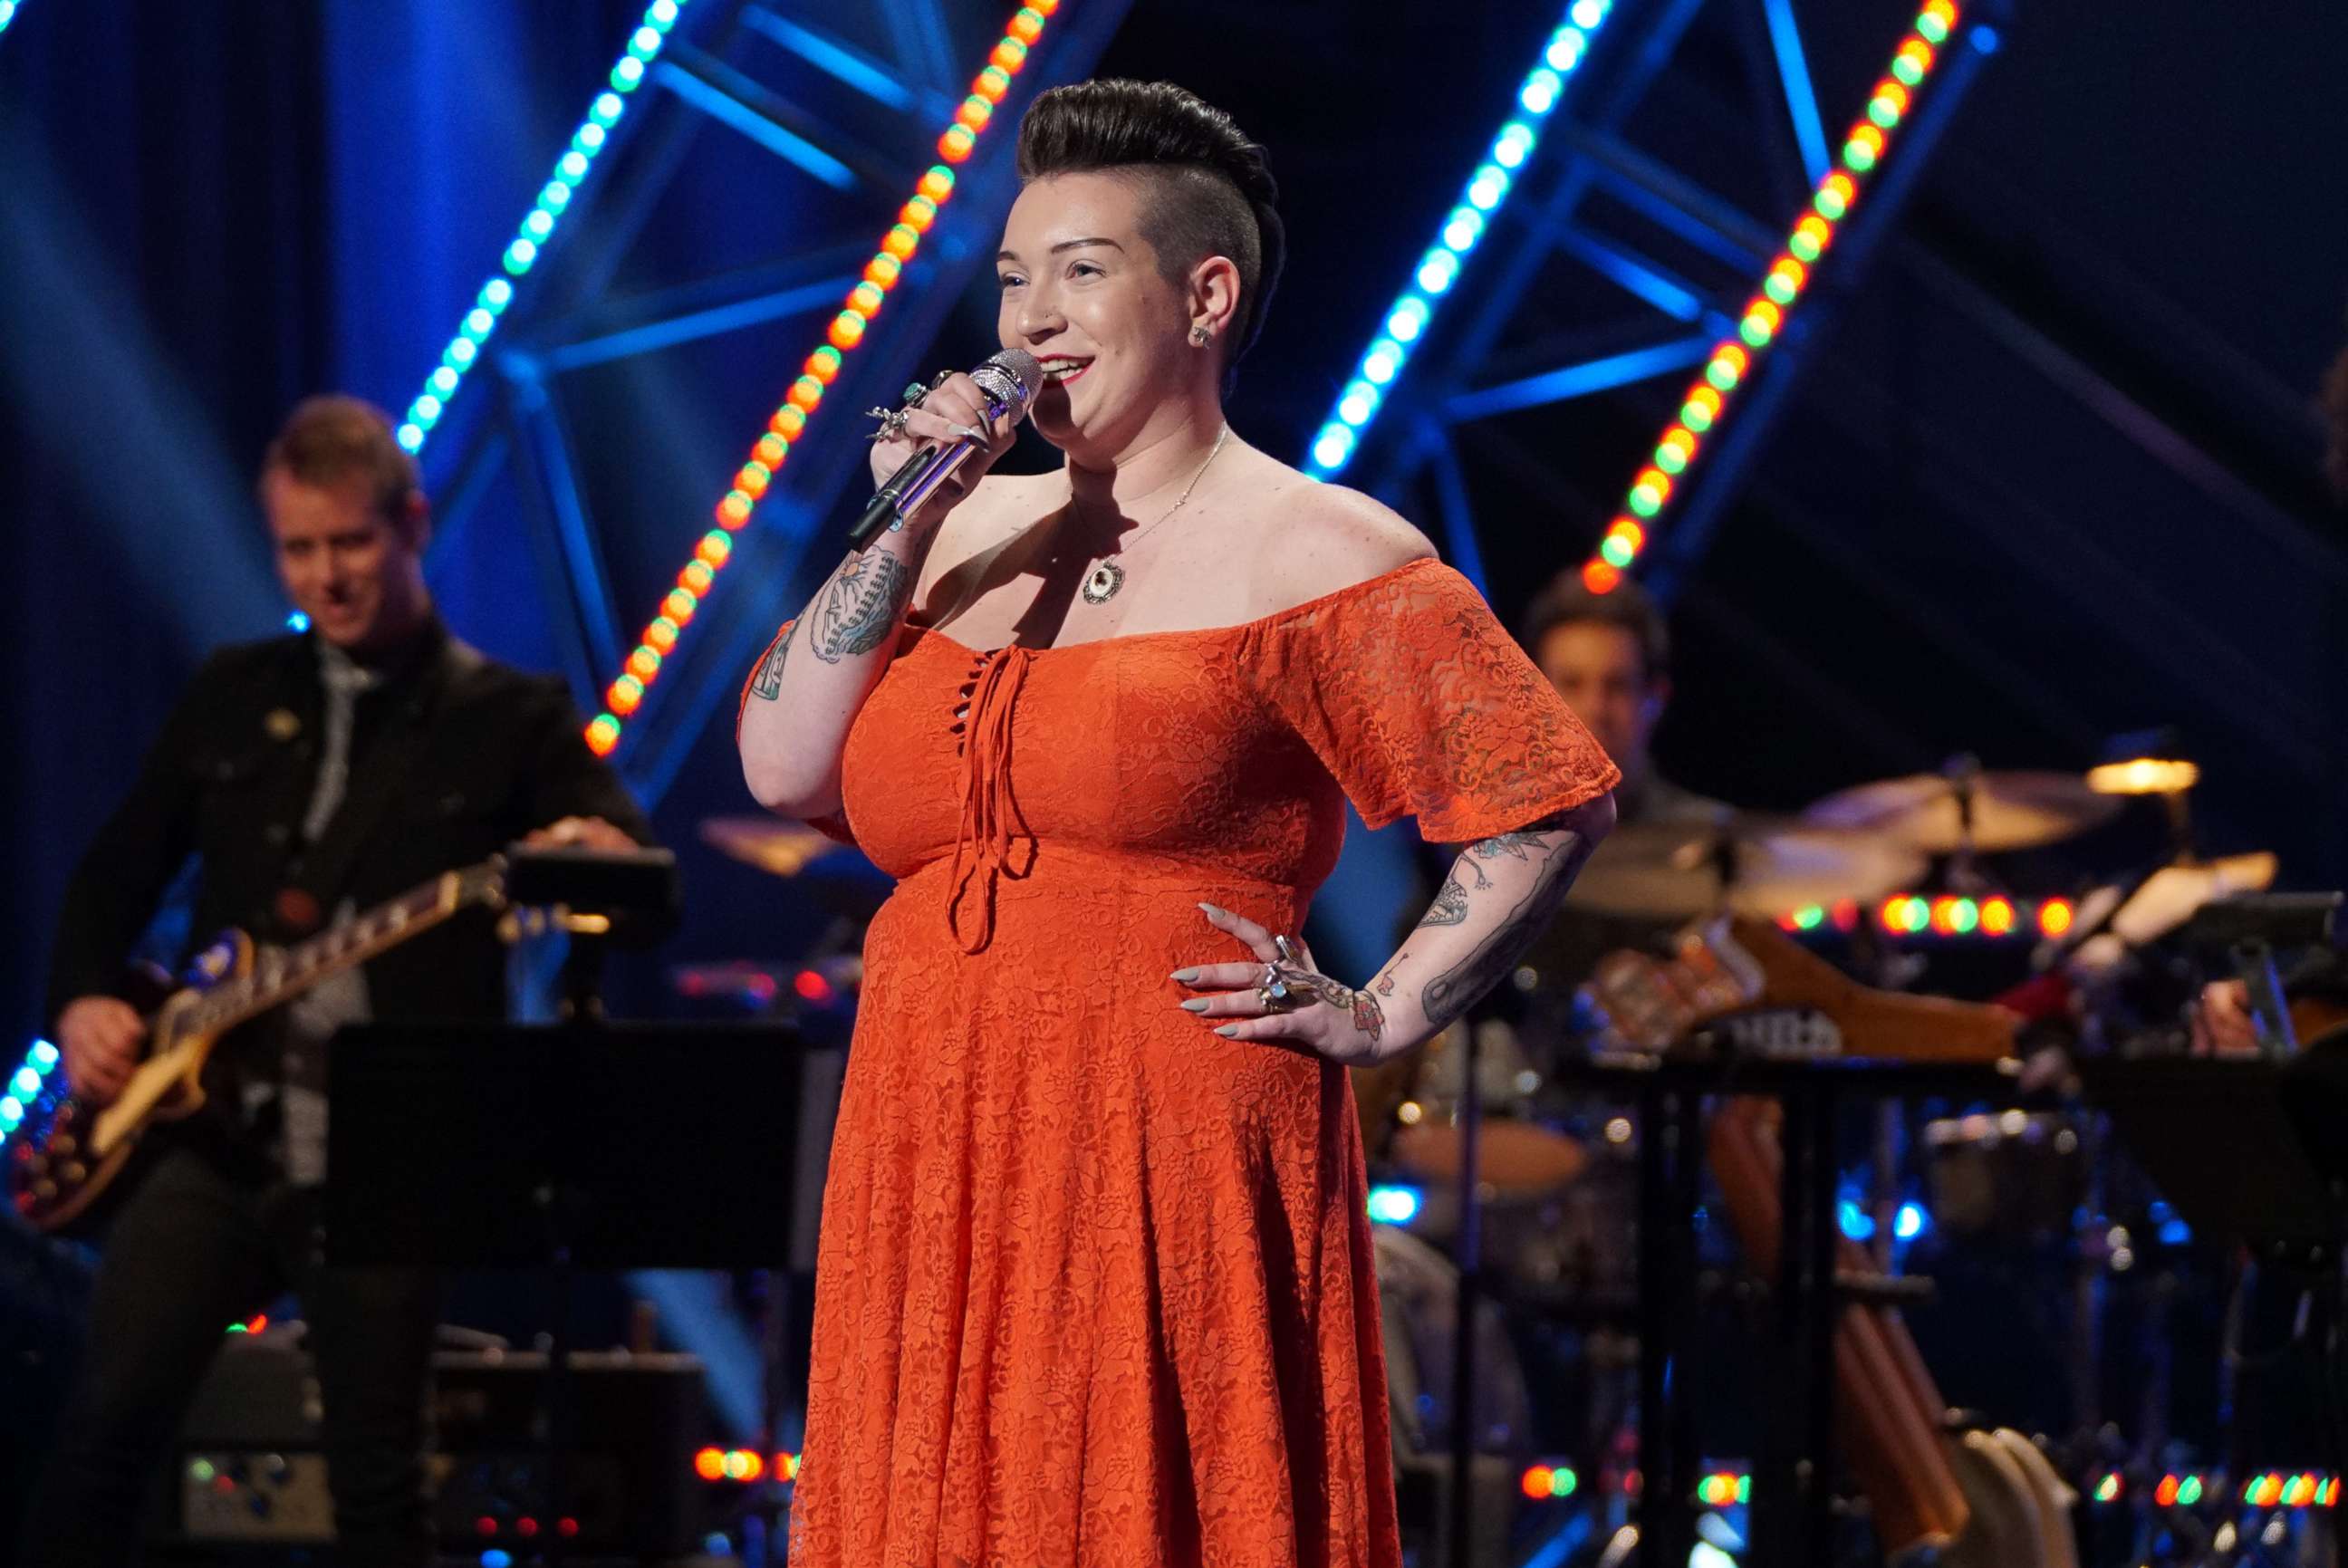 PHOTO: Effie Passero sings "Alone" by Heart on the April 1, 2018 episode of ABC's, "American Idol."